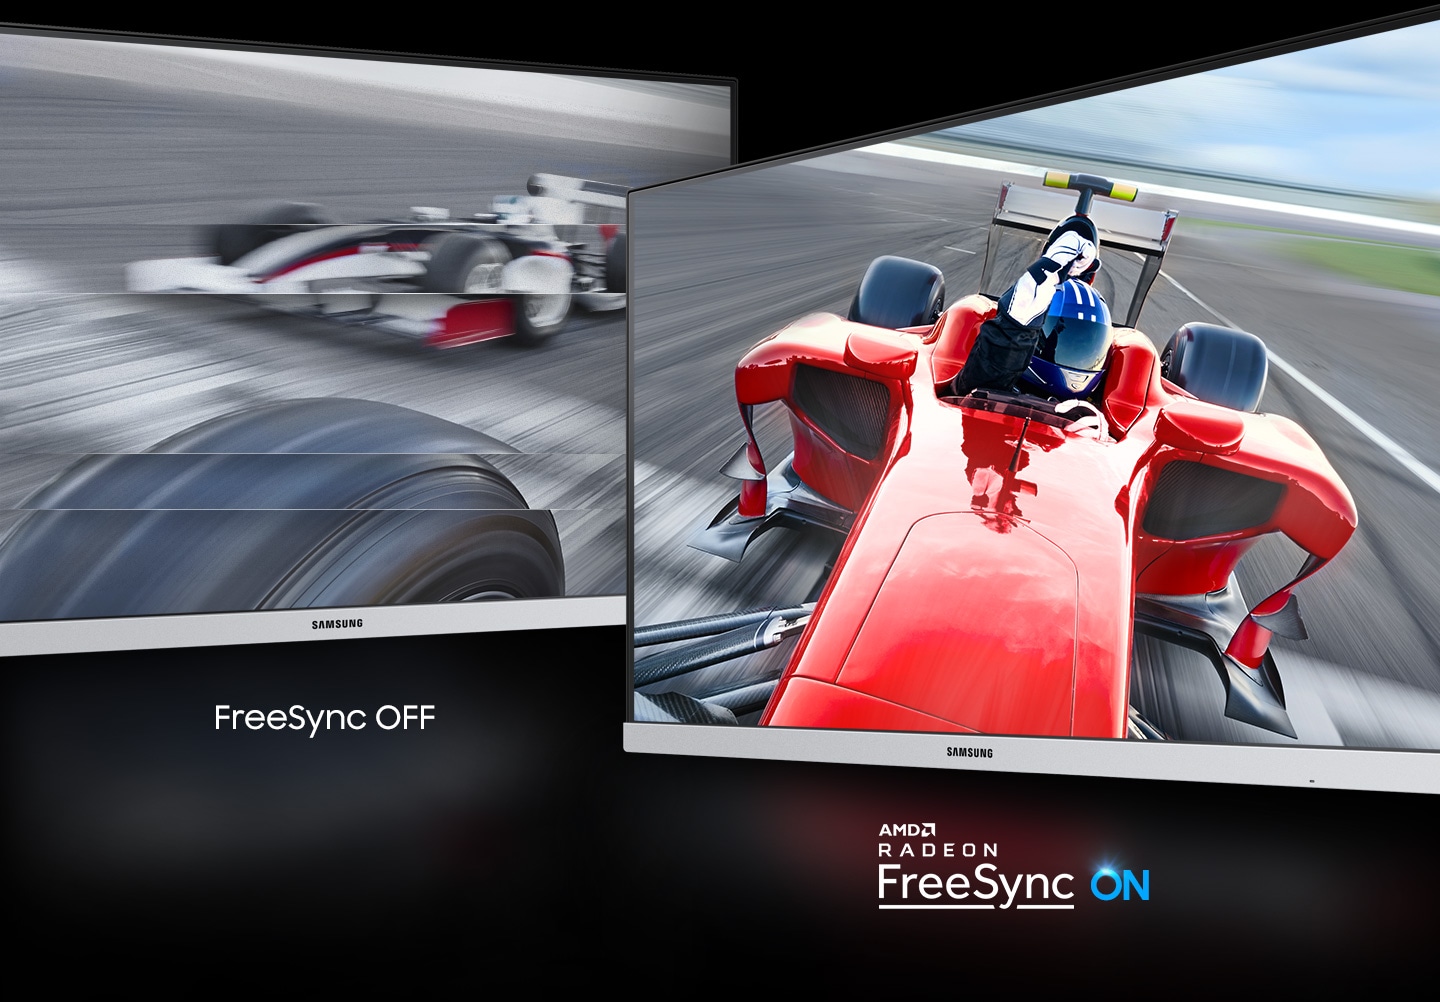 Comparing Freesync off and AMD Radeon Freesync On. In Freesync off, horizontal lines are visible on the screen and the image is out of alignment, but in Freesync on, a clear image is visible.